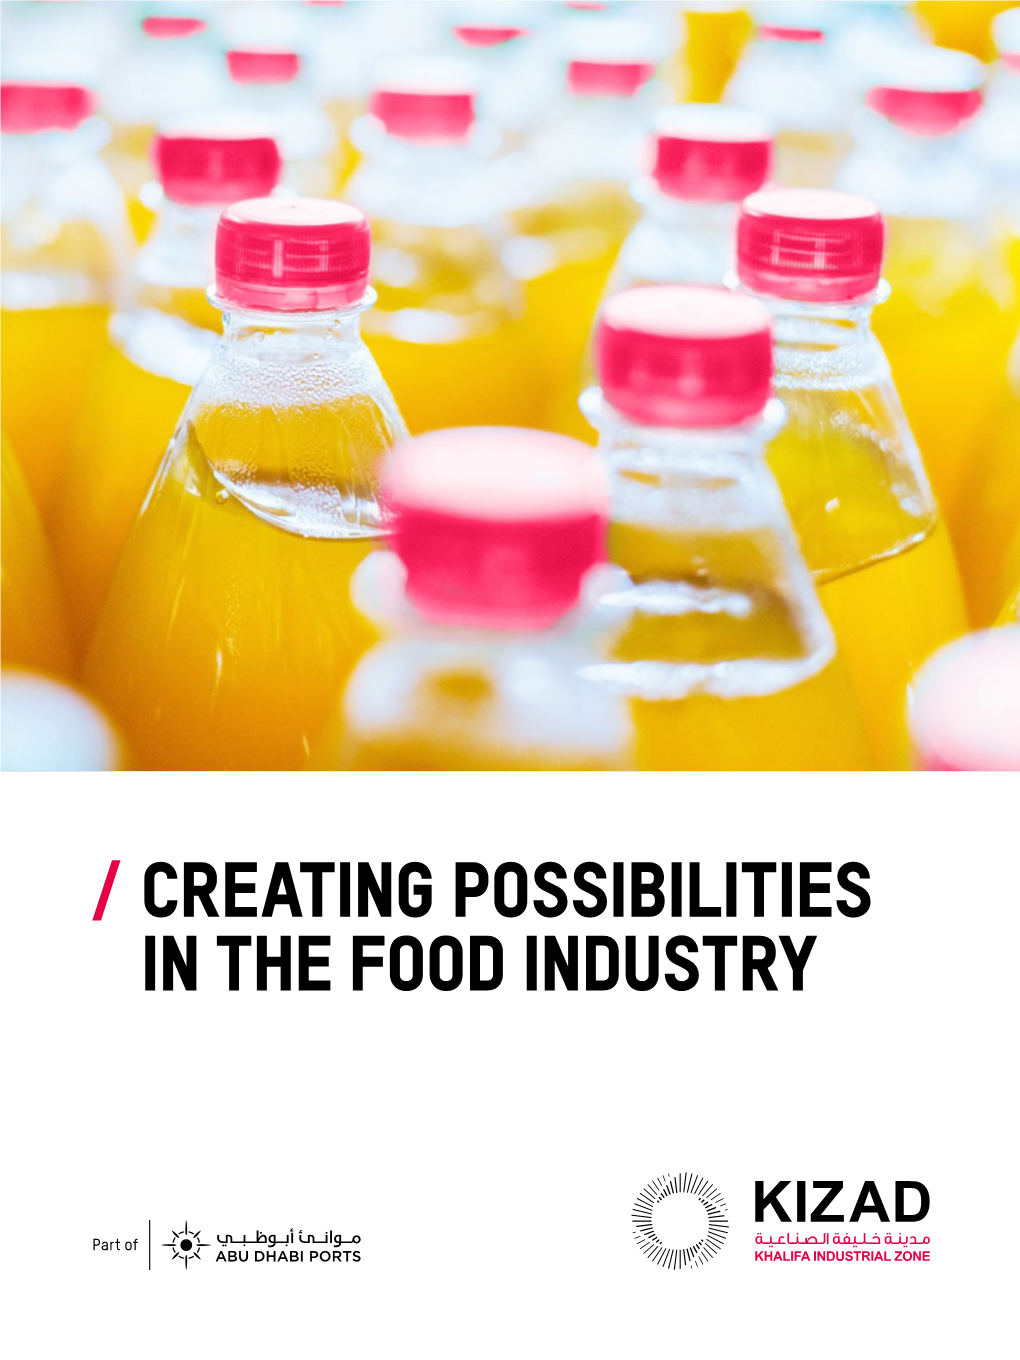 Creating Possibilities in the Food Industry